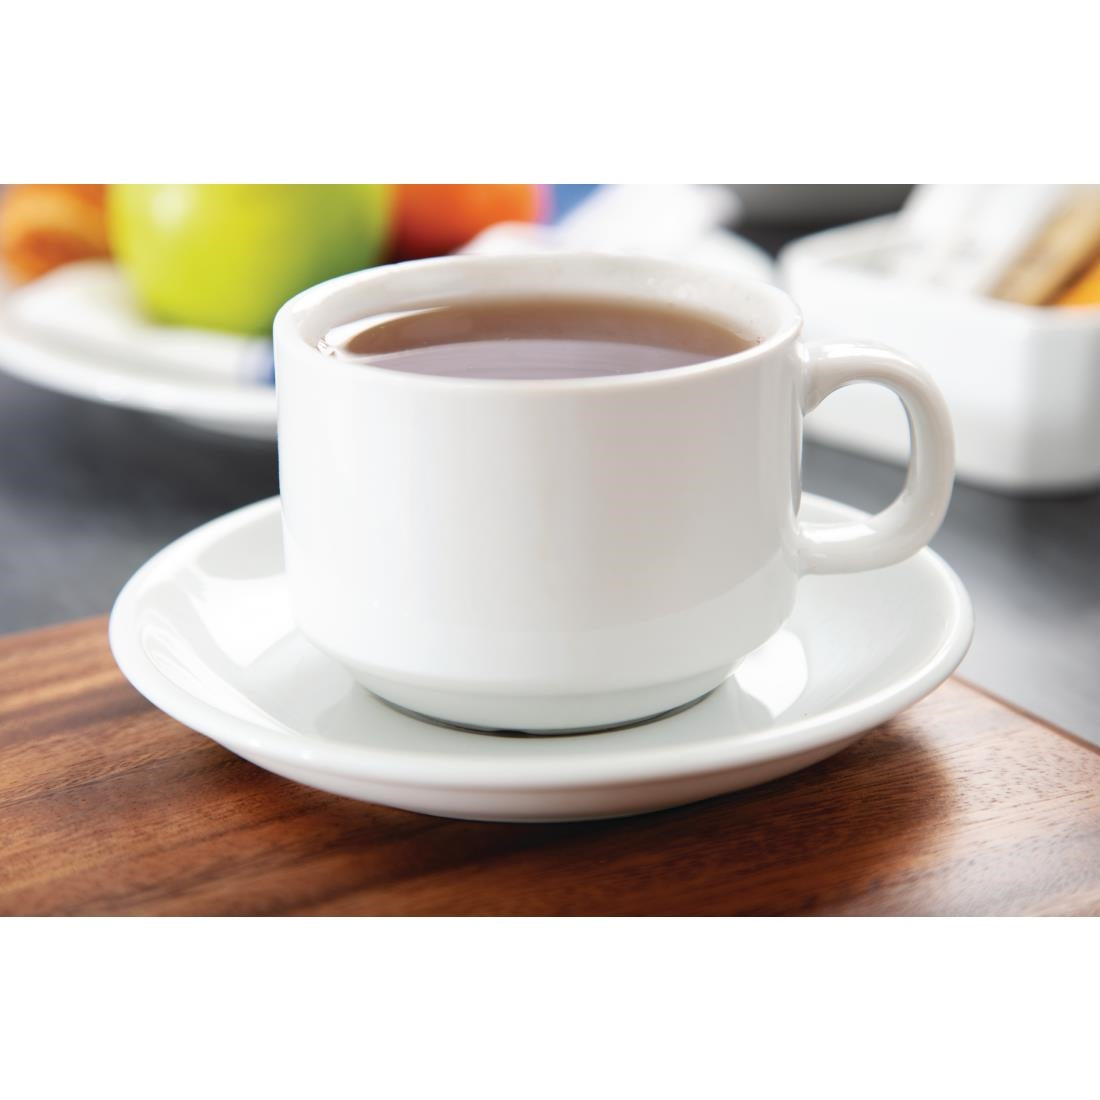 Athena Hotelware Stacking Cups 7oz (Pack of 24) JD Catering Equipment Solutions Ltd